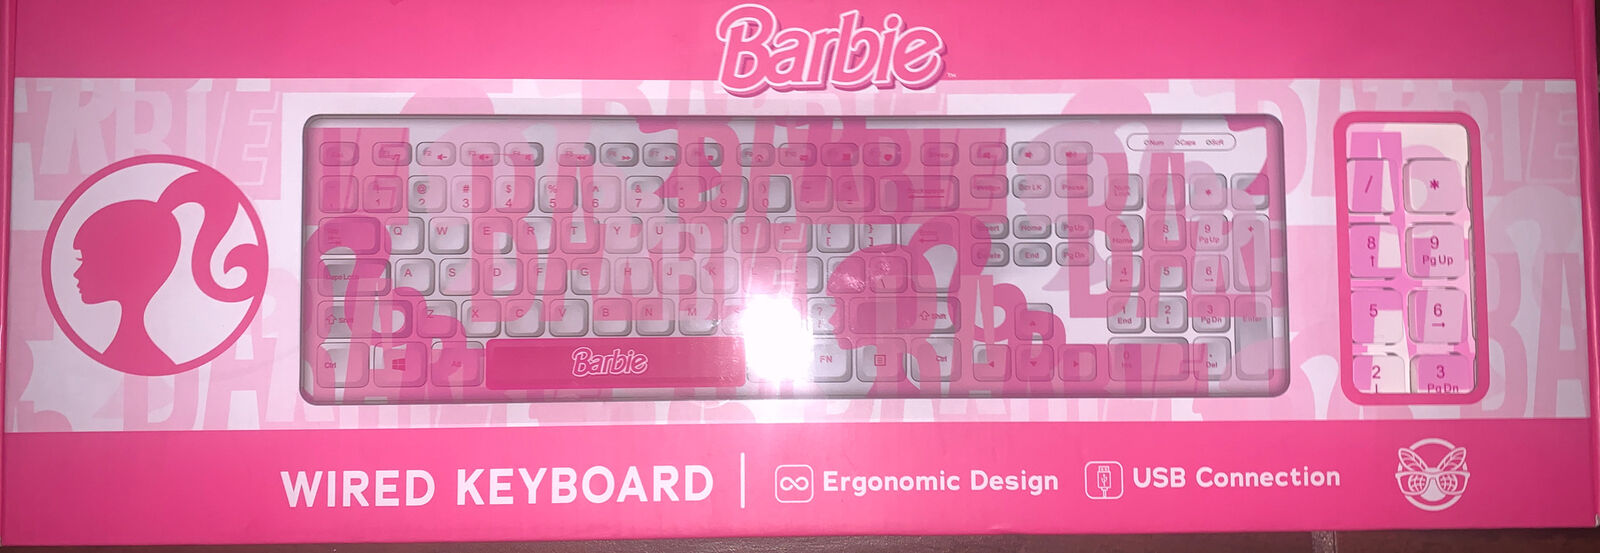 Barbie Wired Keyboard Culturefly, USB Connection, Ergonomic Design  Pink NEW